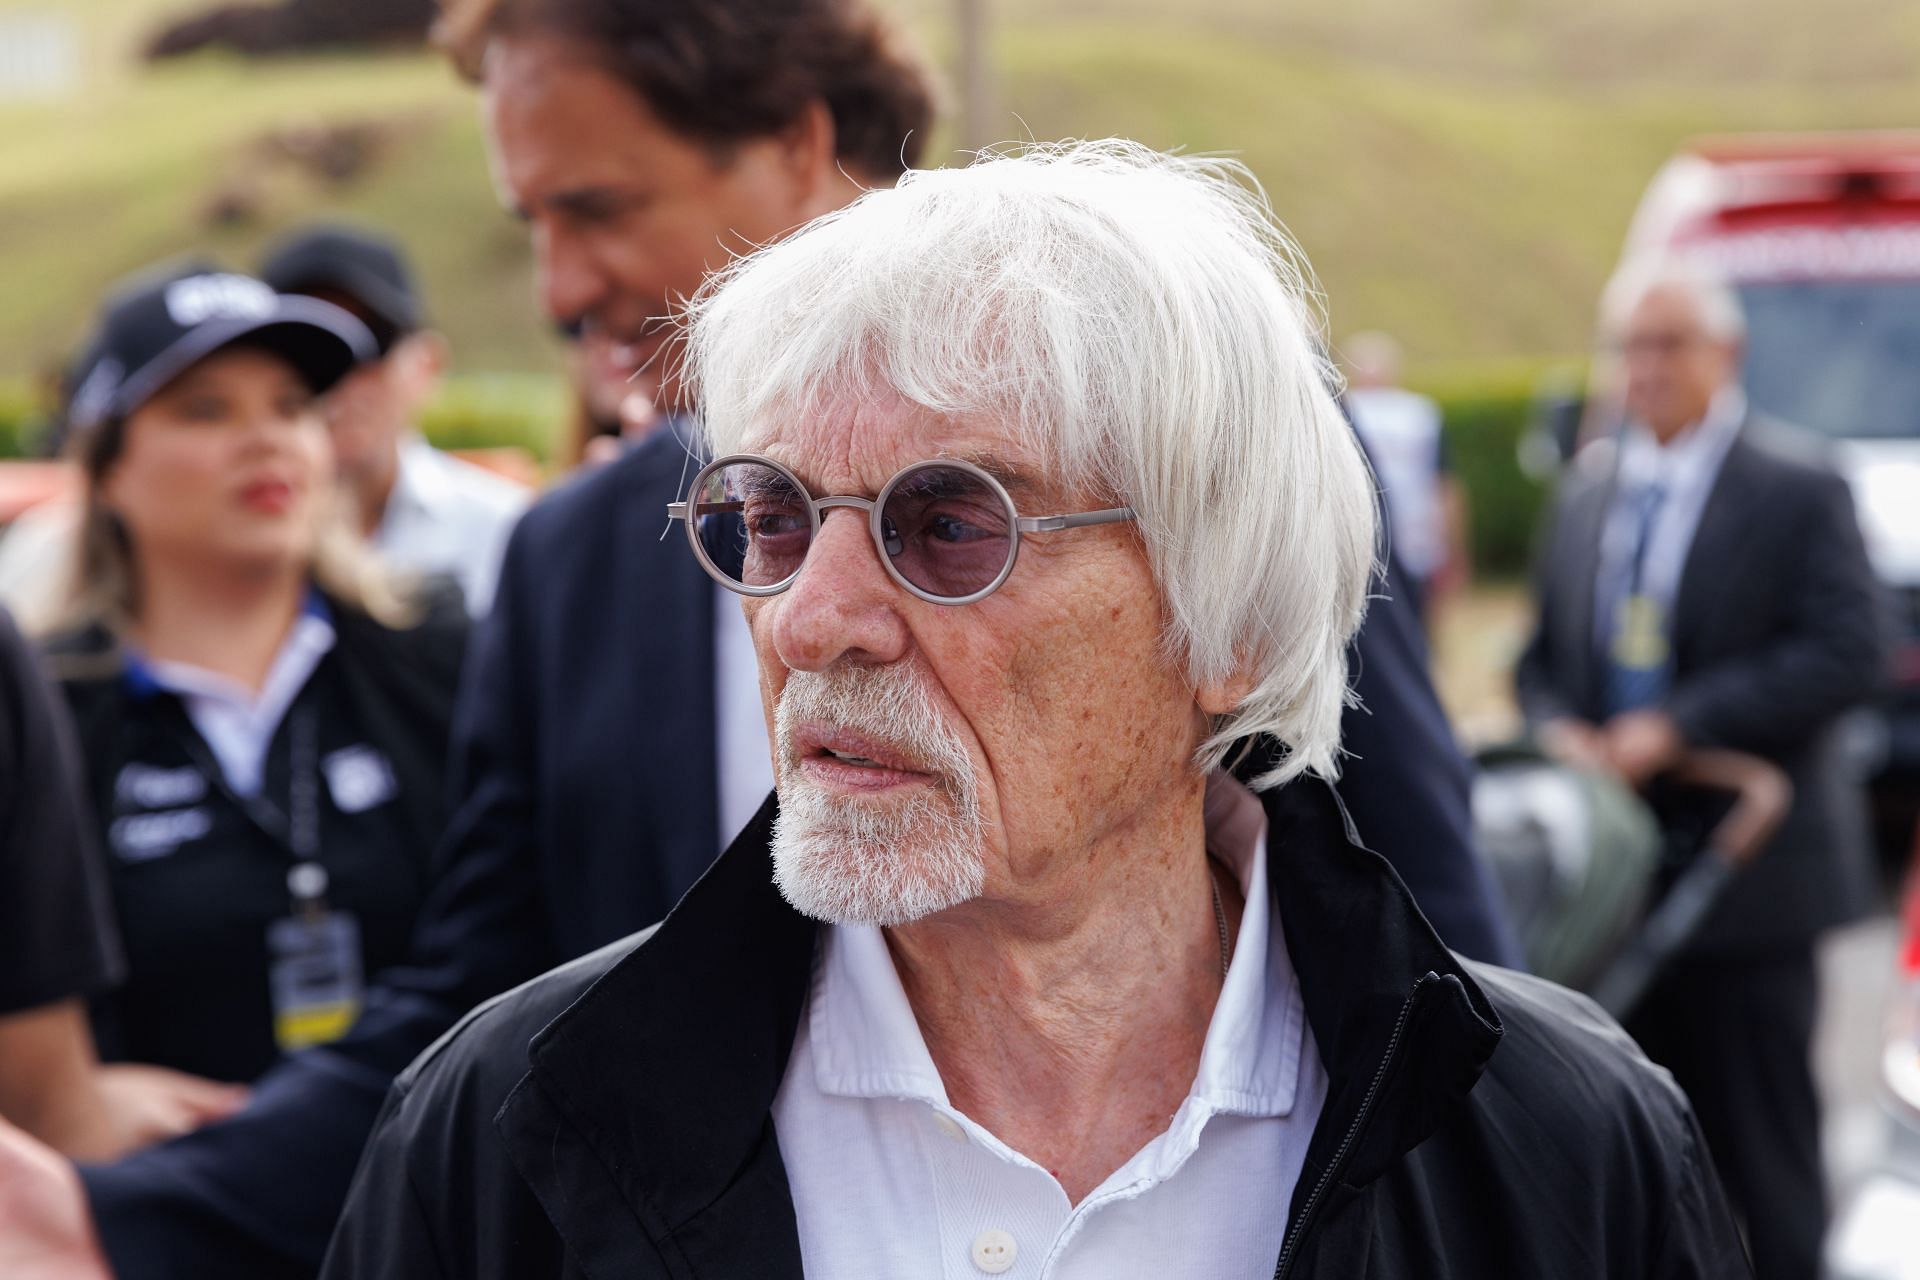 Bernie Ecclestone during a visit to the Velocitta racetrack for a Stock Car and Formula 4 race on May 15, 2022 in Mogi Guacu, Brazil. (Photo by Marcelo Machado de Melo/Getty Images)